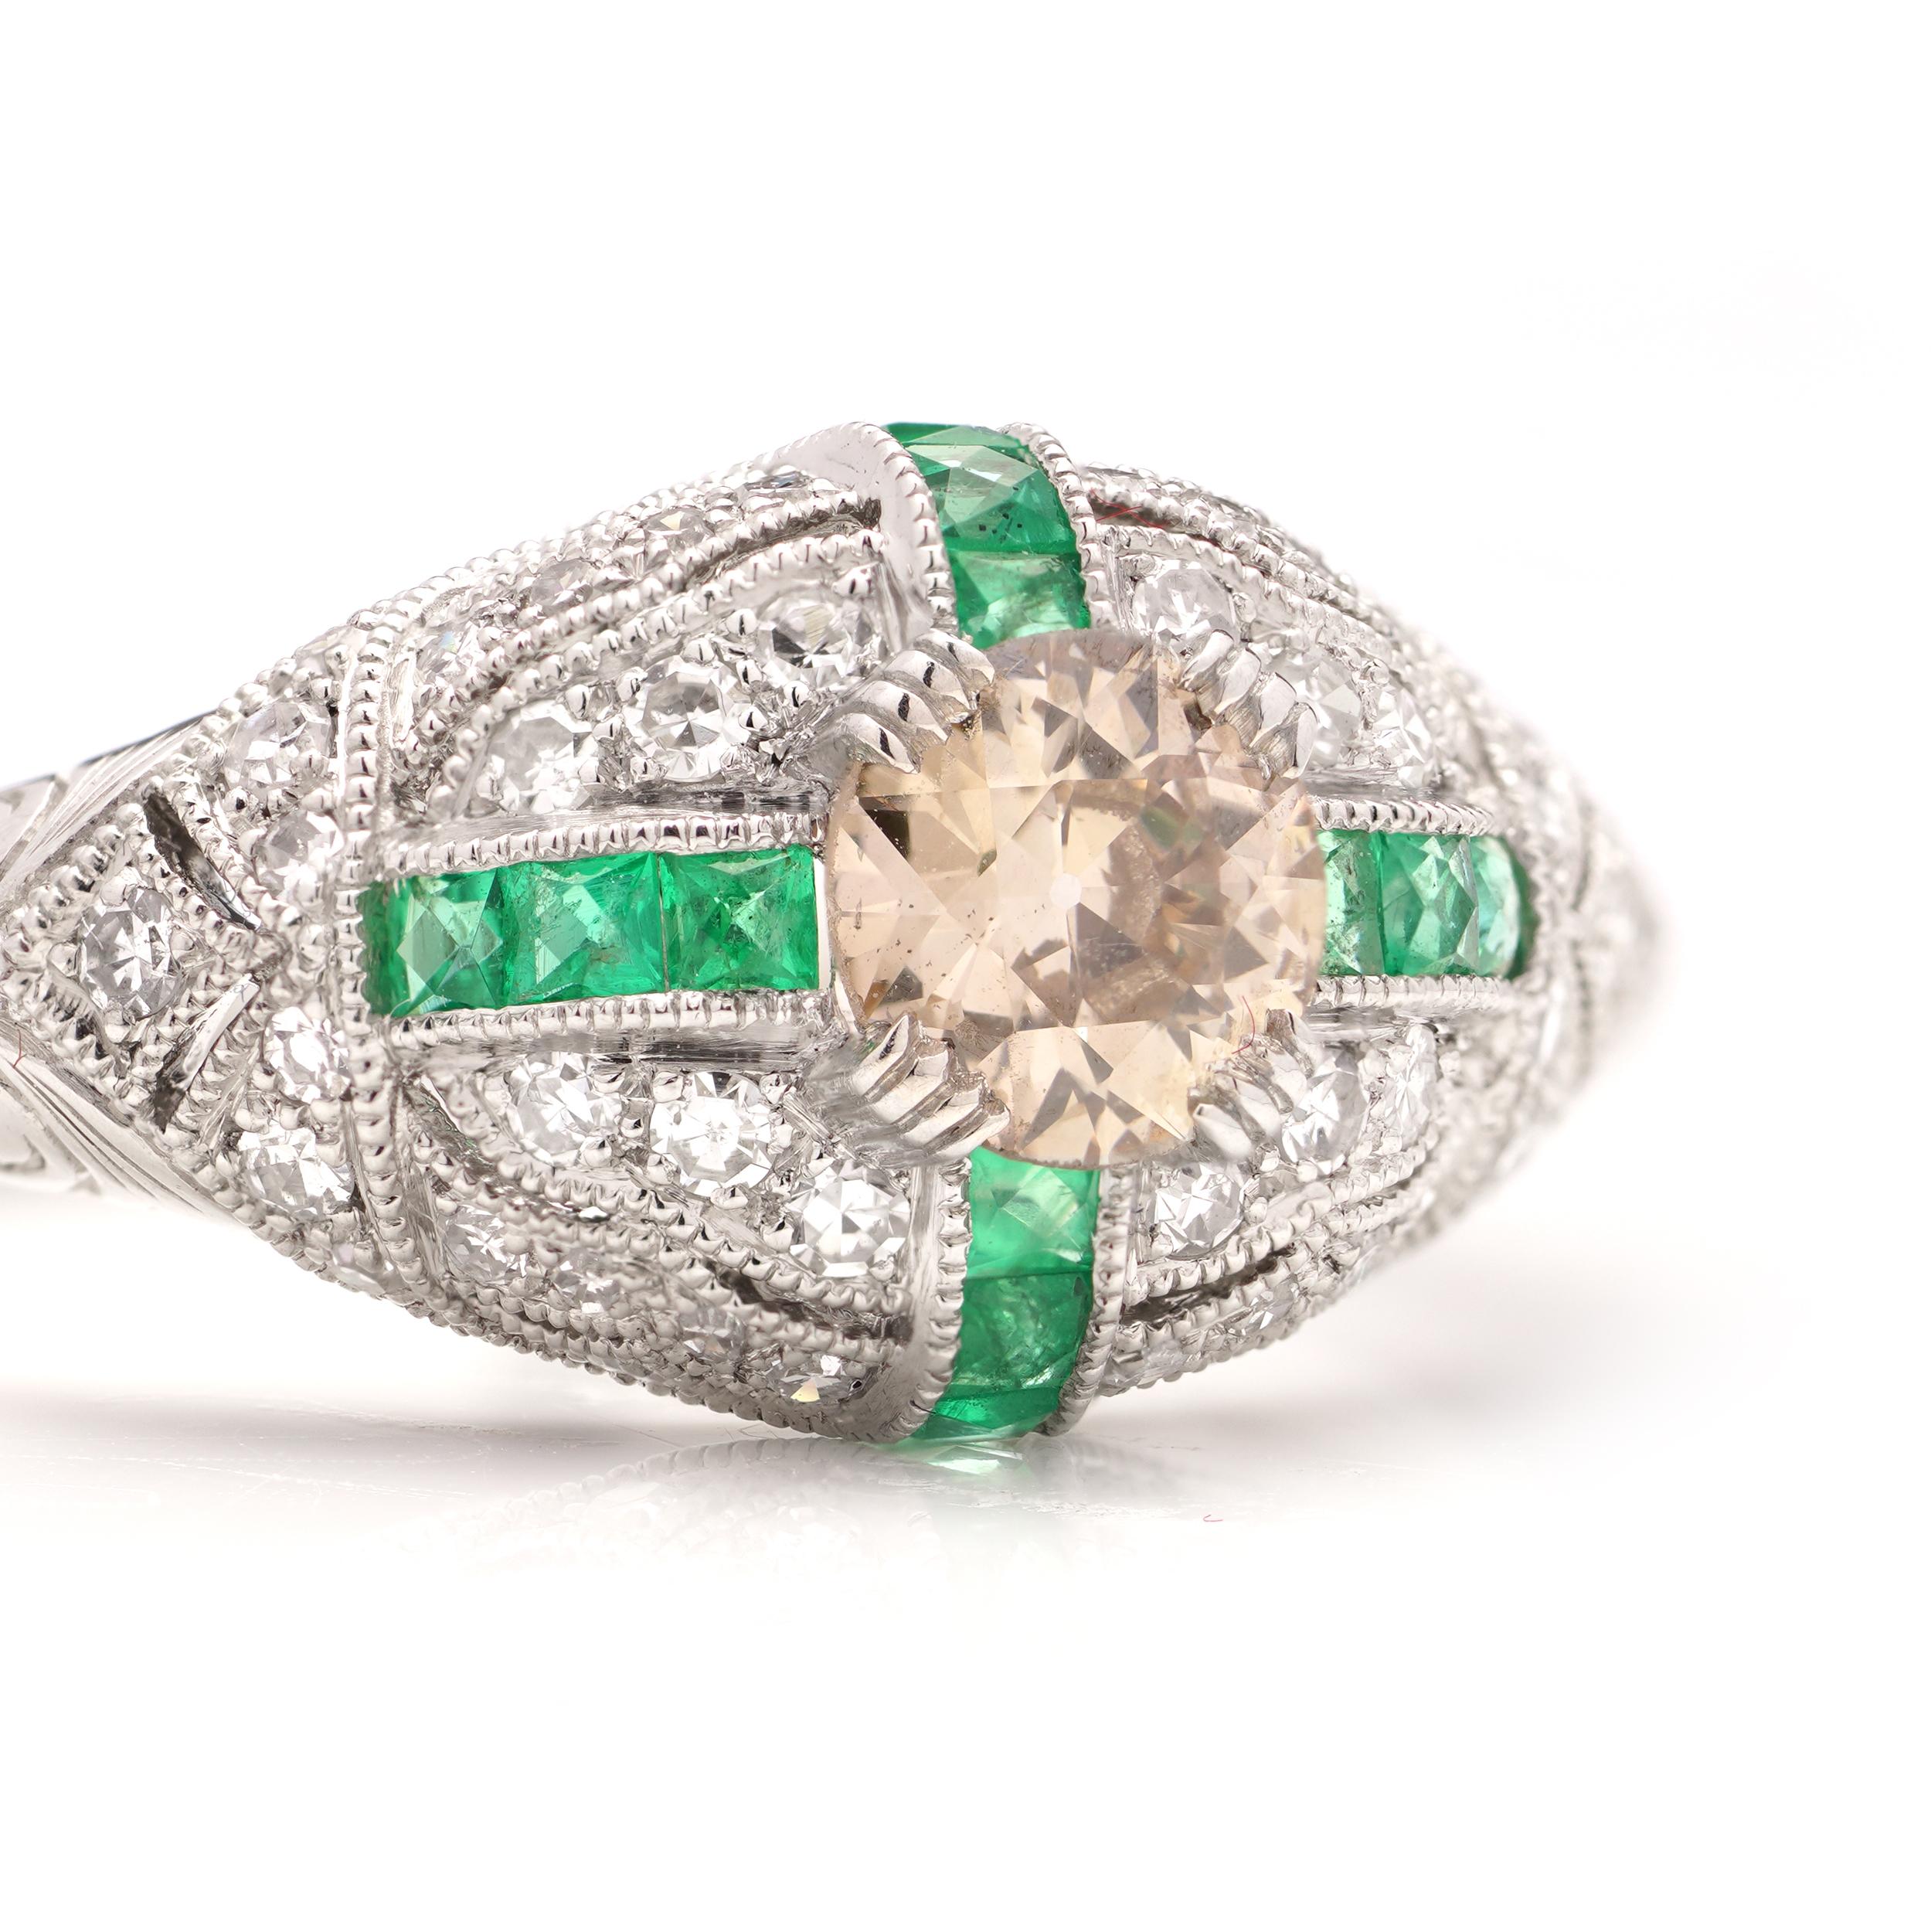 Platinum Art Deco-inspired 0.41 carats of fancy Champagne Colour Old -European cut dome ring surrounded by round brilliant diamonds and square-cut emeralds. 

Made in After 2000
Maker: JoAq 
X-Ray tested positive for .850 platinum purity.